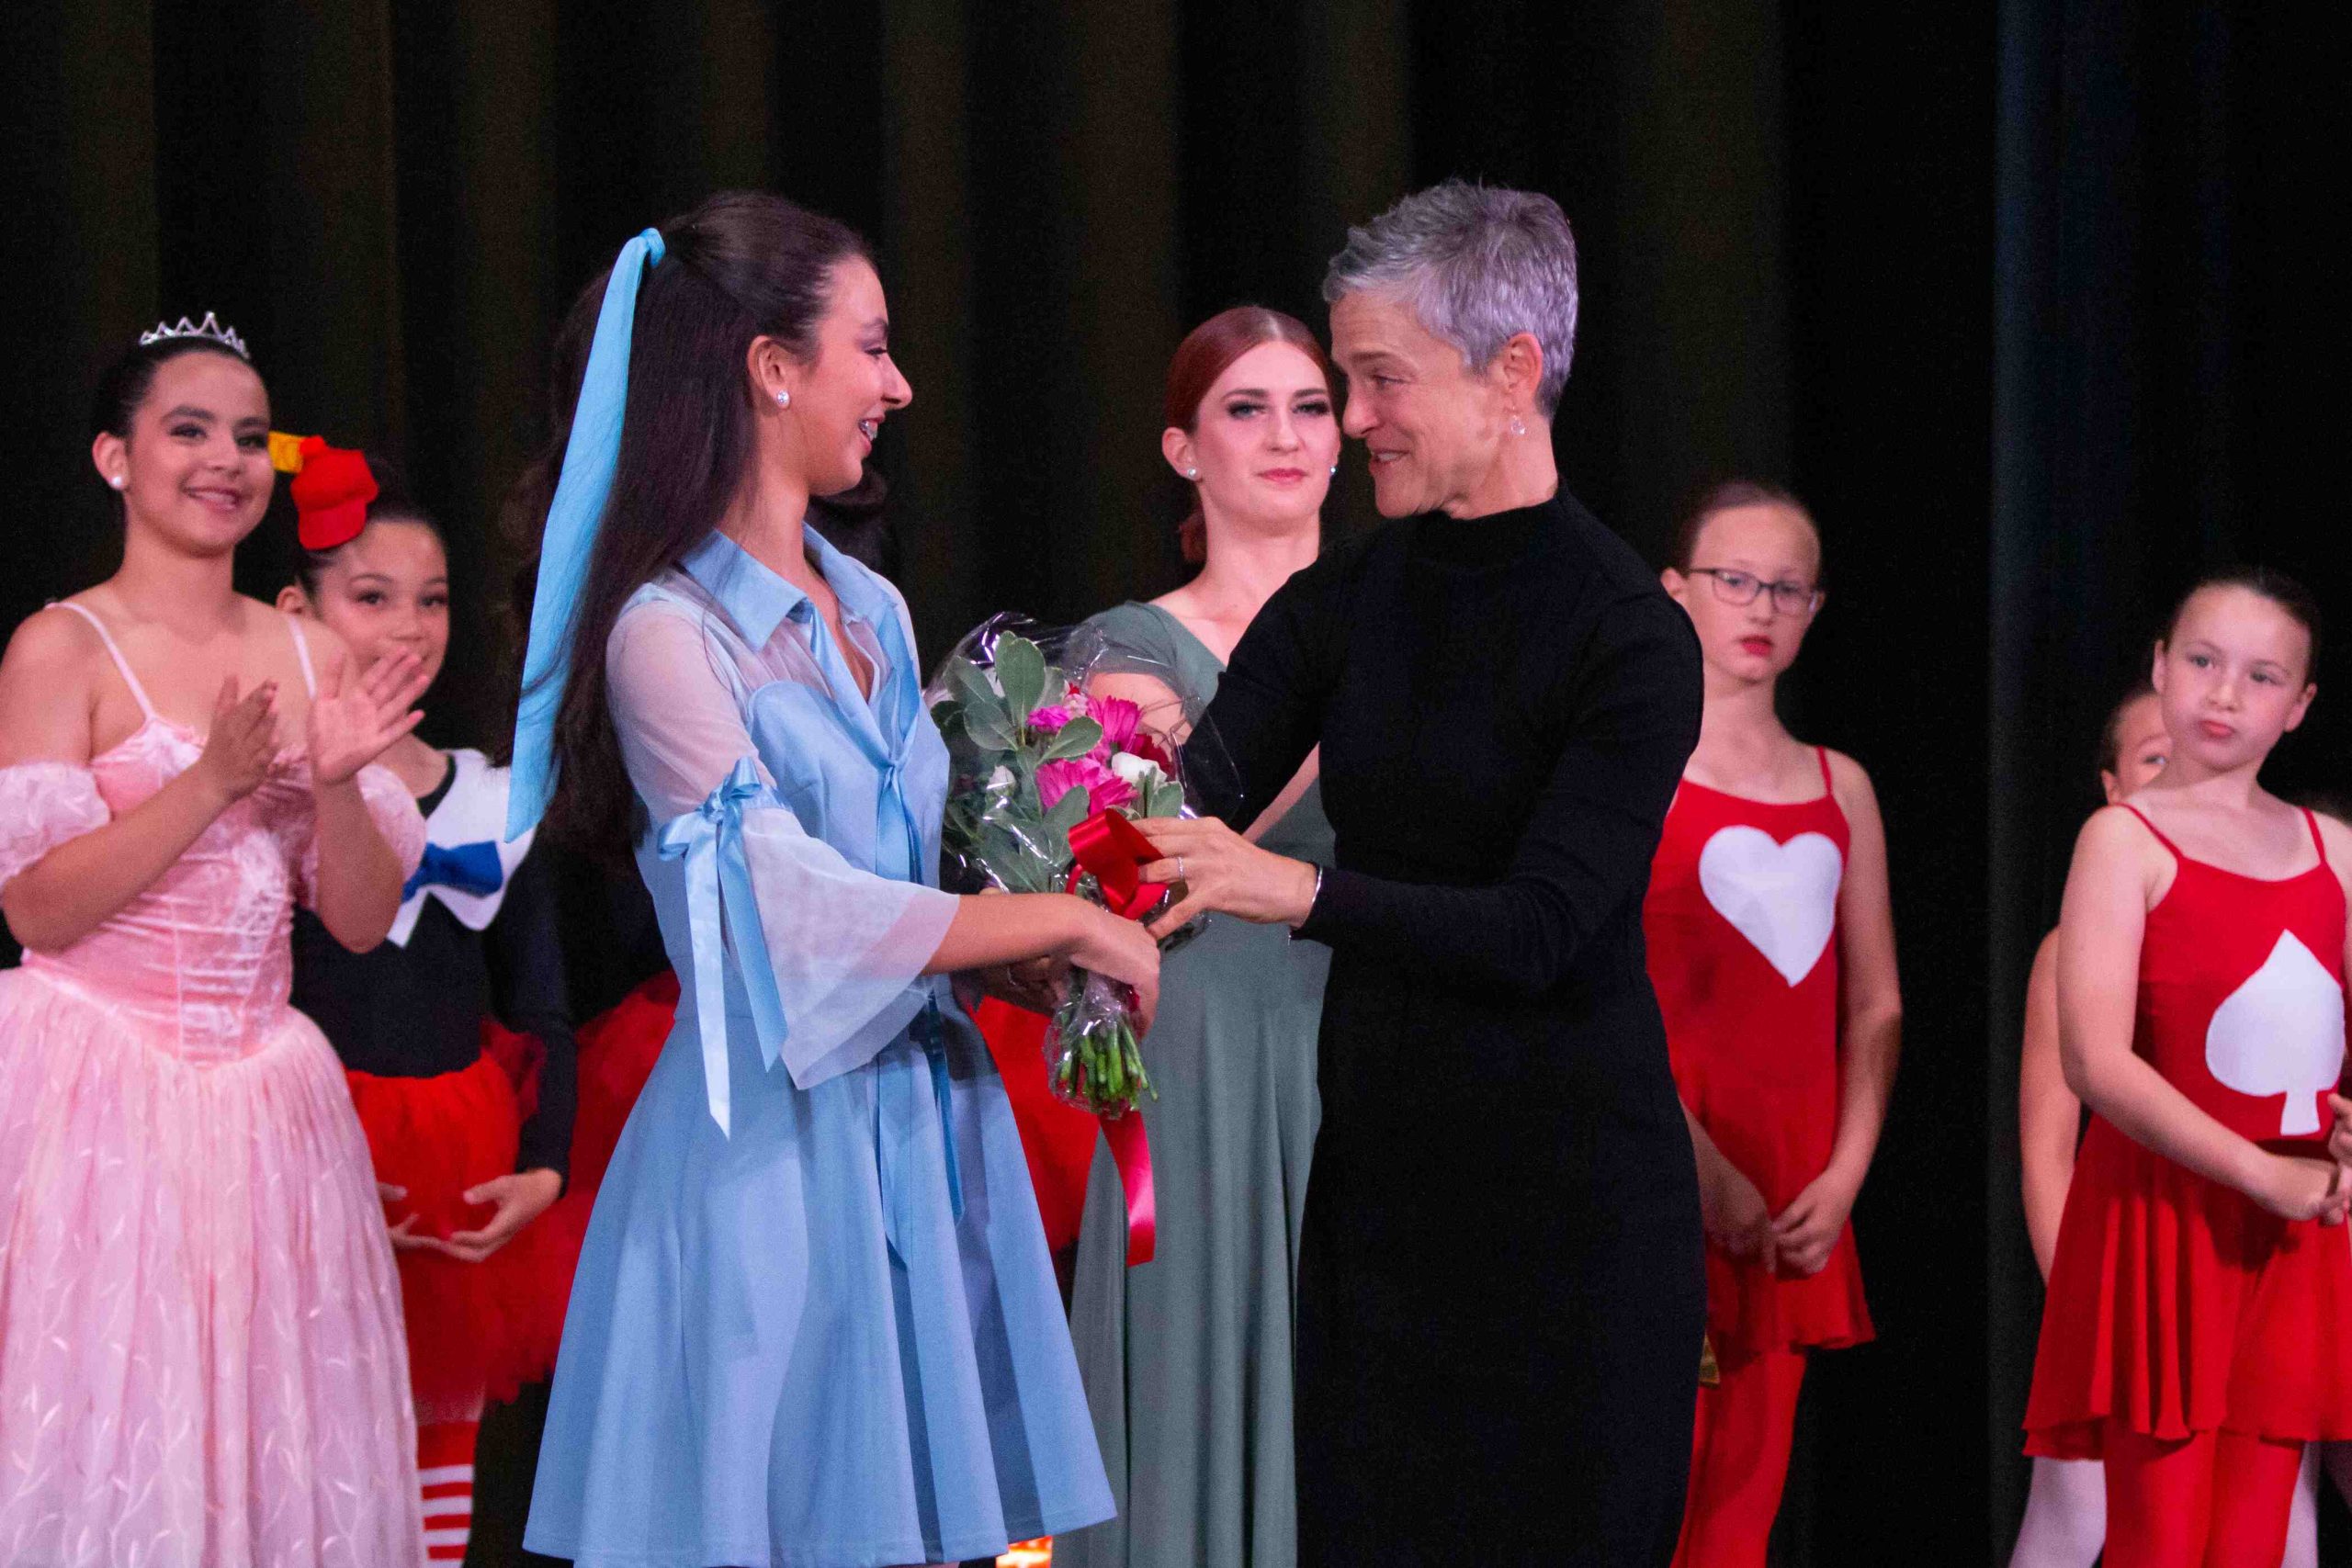 A senior ballerina and artistic director accepts flowers from her star ballerina